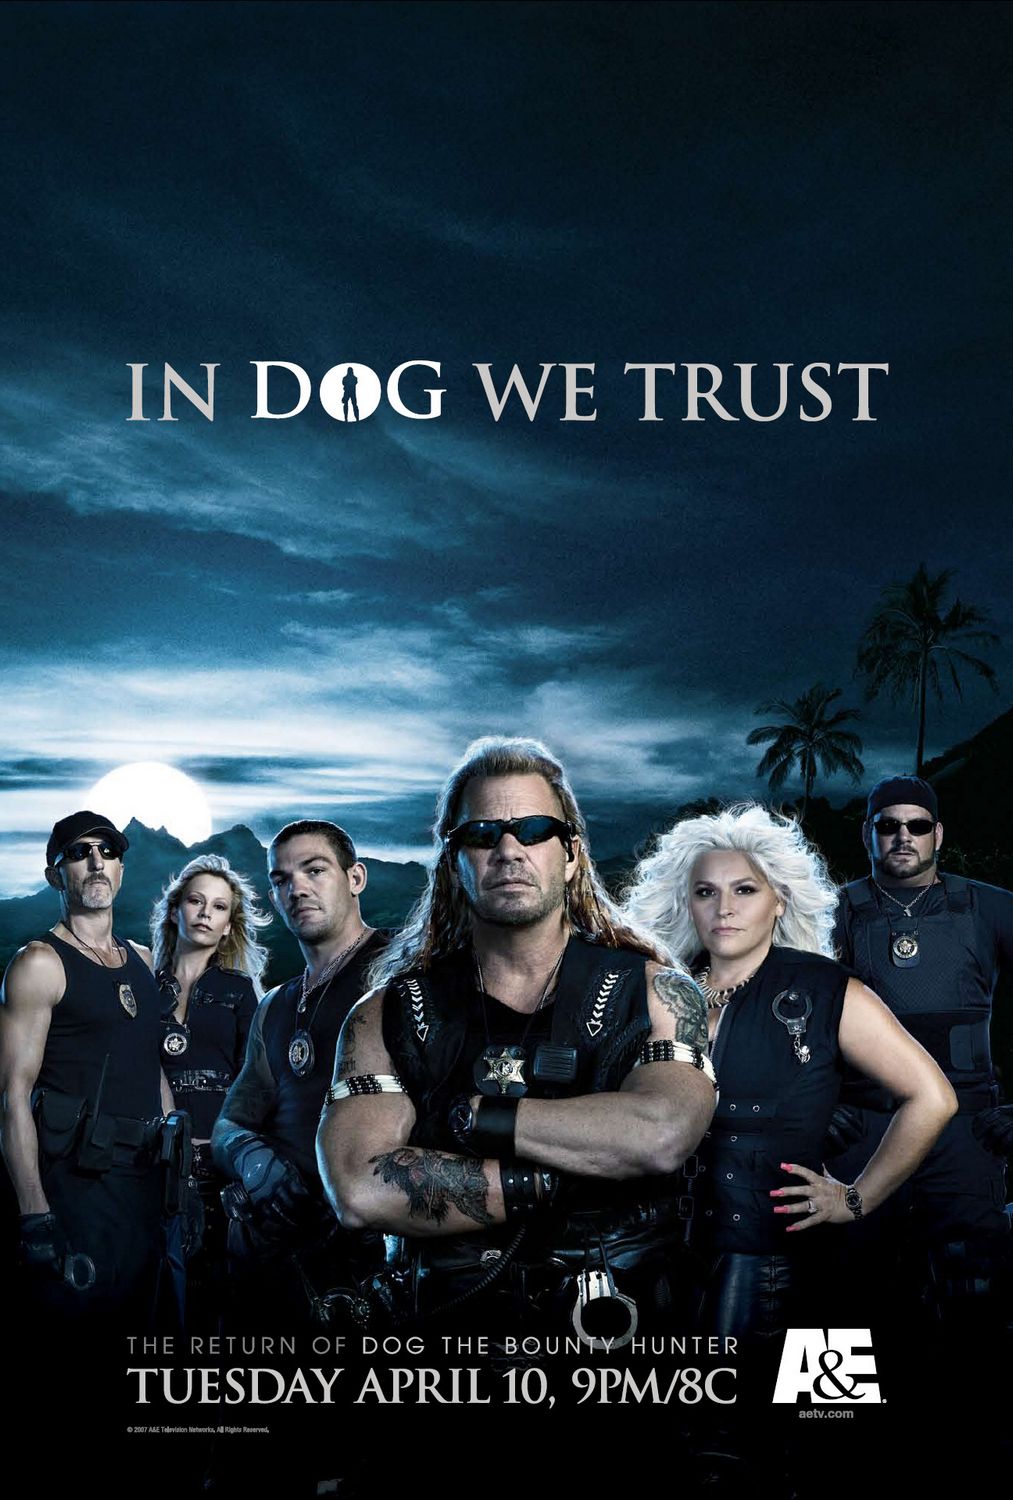 Extra Large TV Poster Image for Dog the Bounty Hunter (#2 of 3)